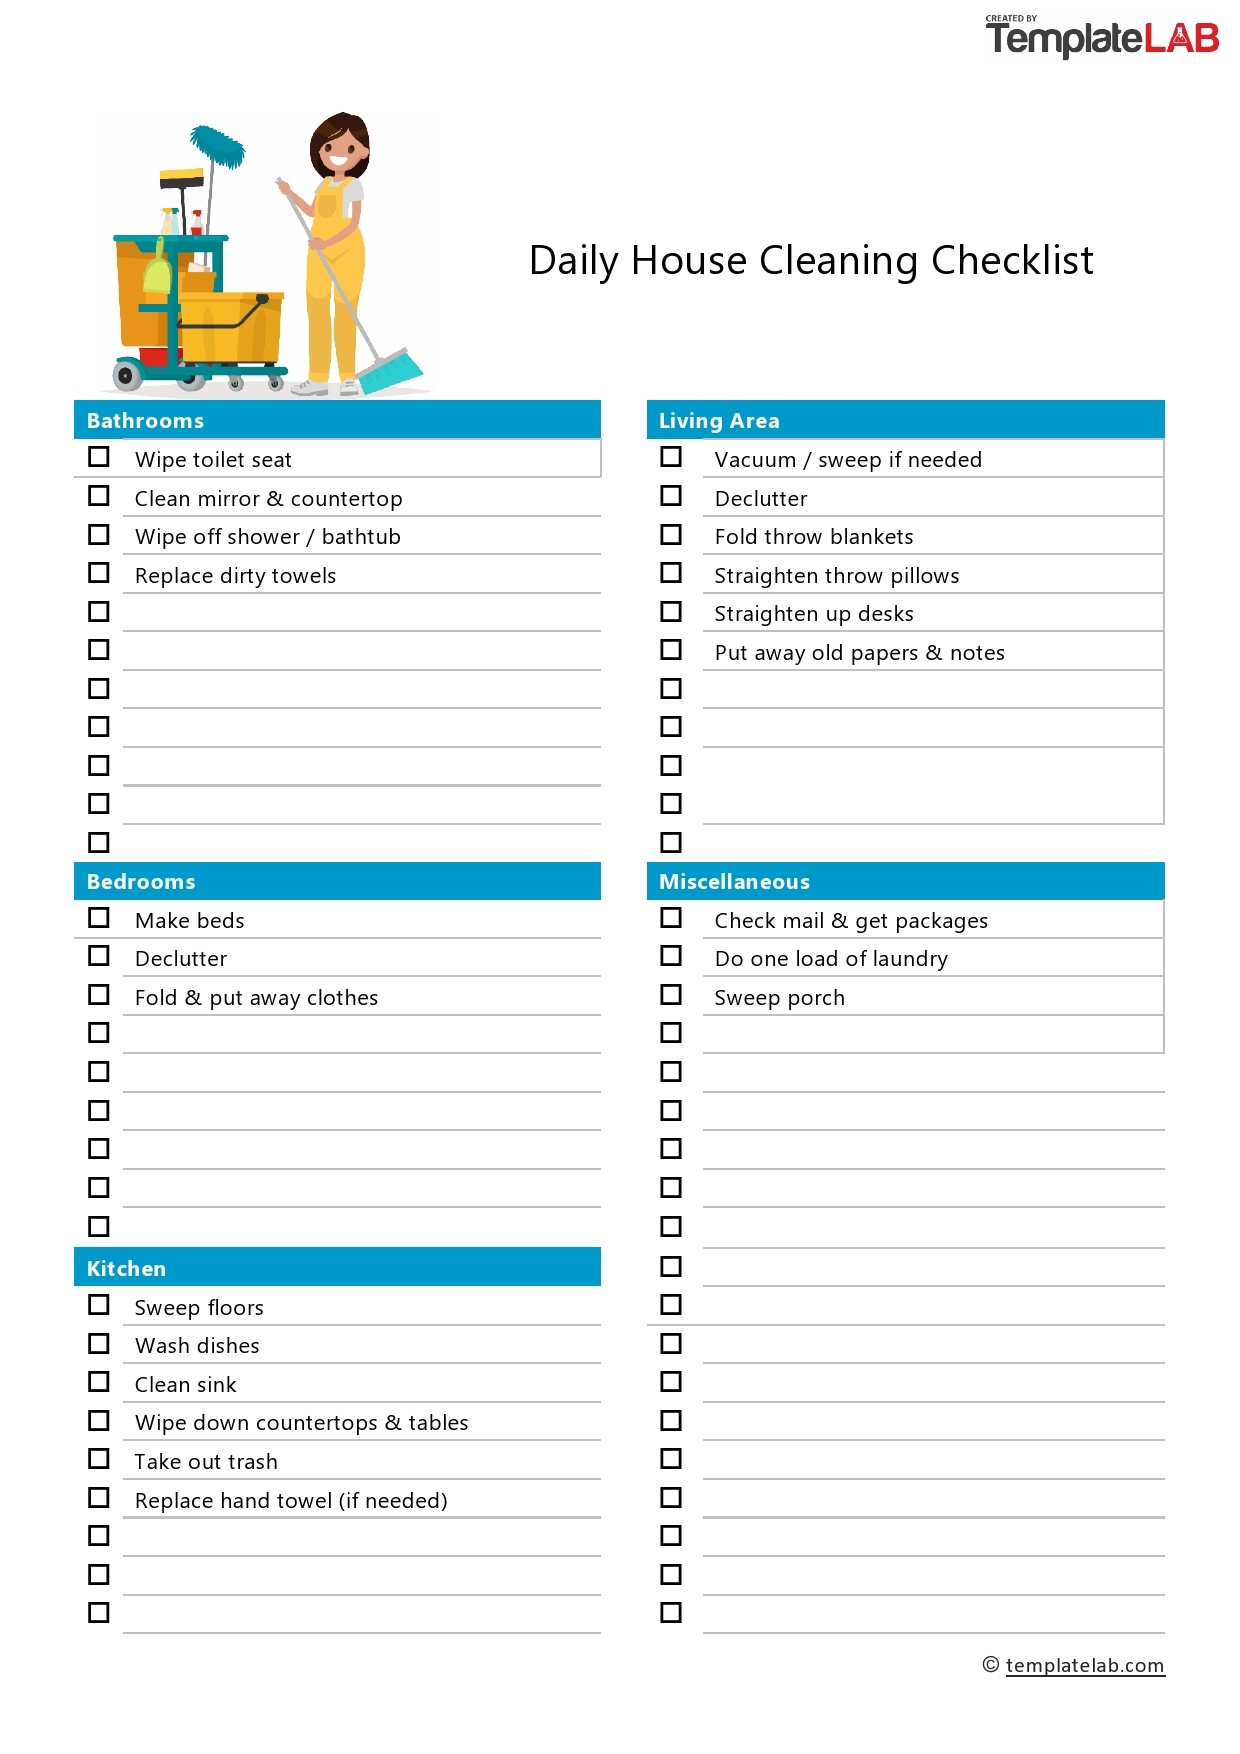 11 Printable House Cleaning Checklist Templates ᐅ TemplateLab With Housekeeper Checklist Template Regarding Housekeeper Checklist Template